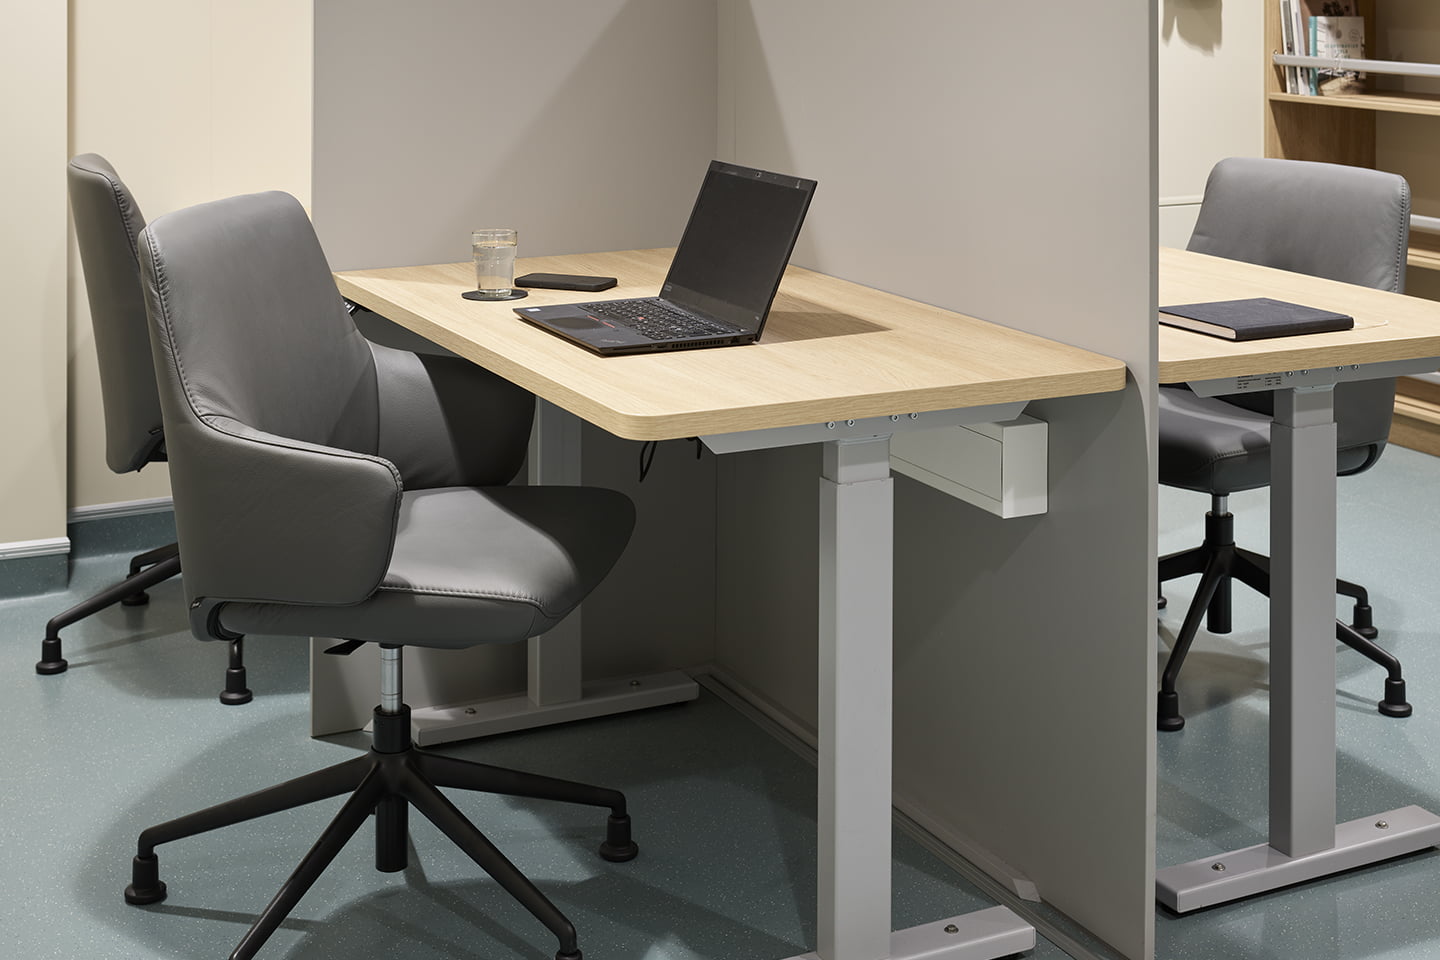 Stressless® dining chairs in working place at KV Jan Mayen